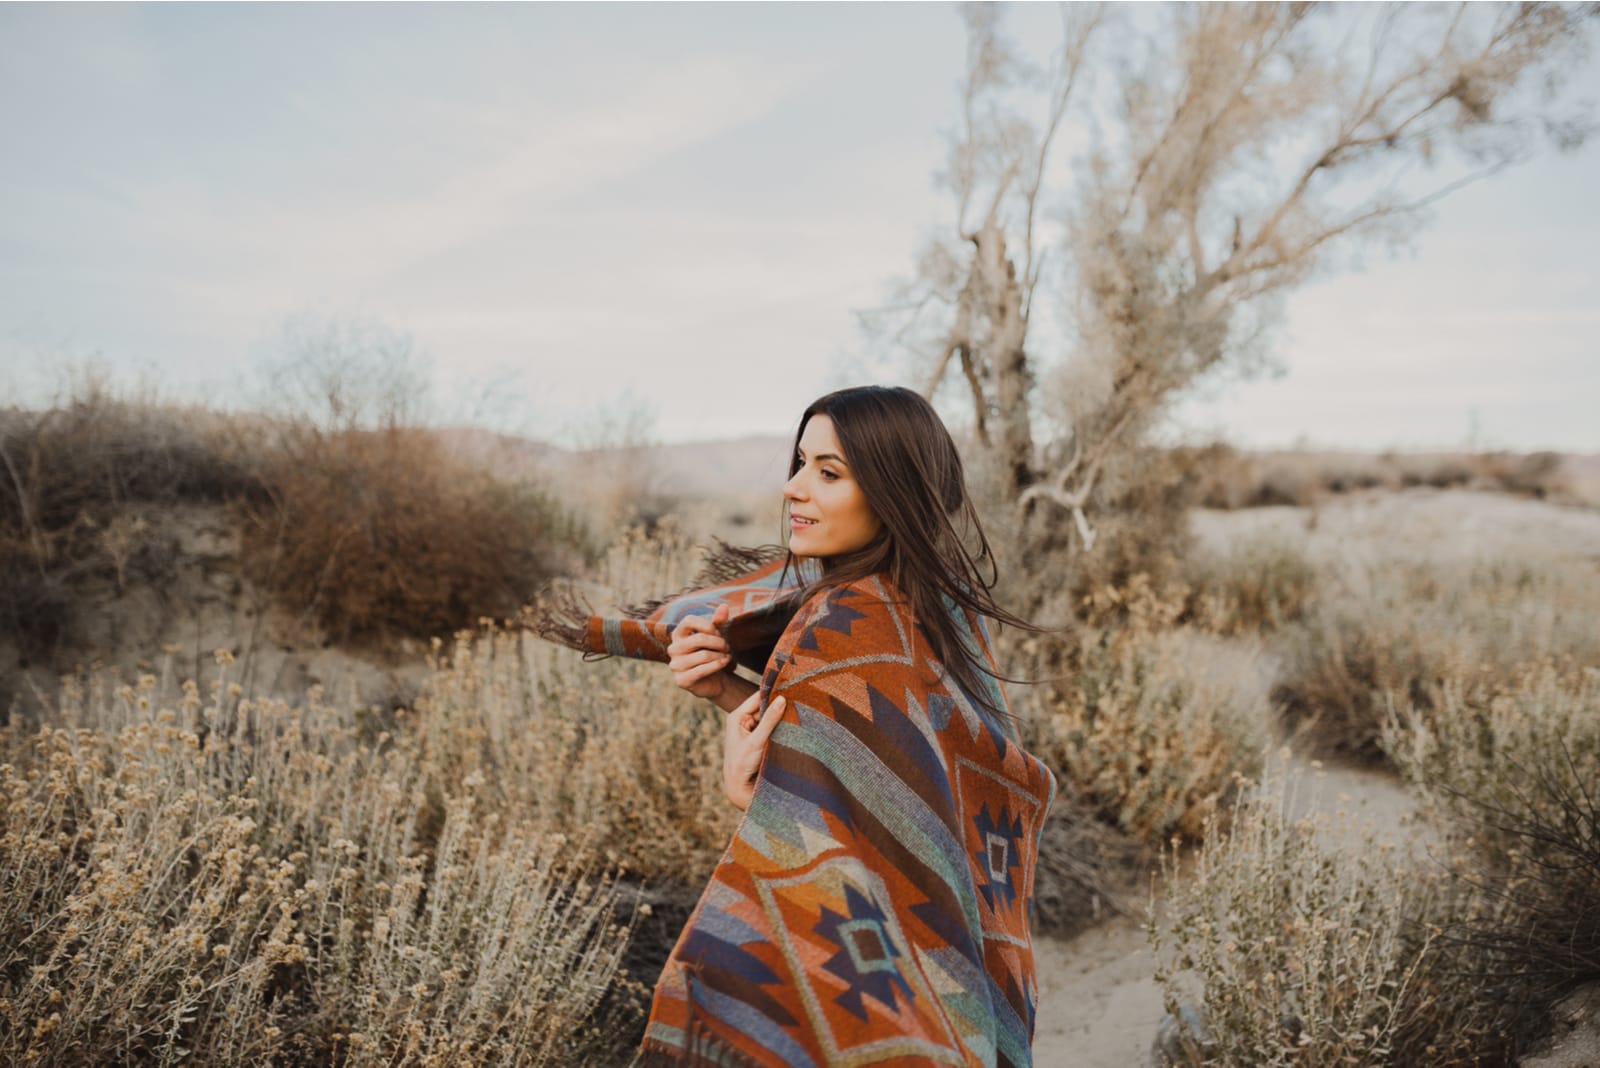 a smiling woman standing in nature wrapped in a brown cloak